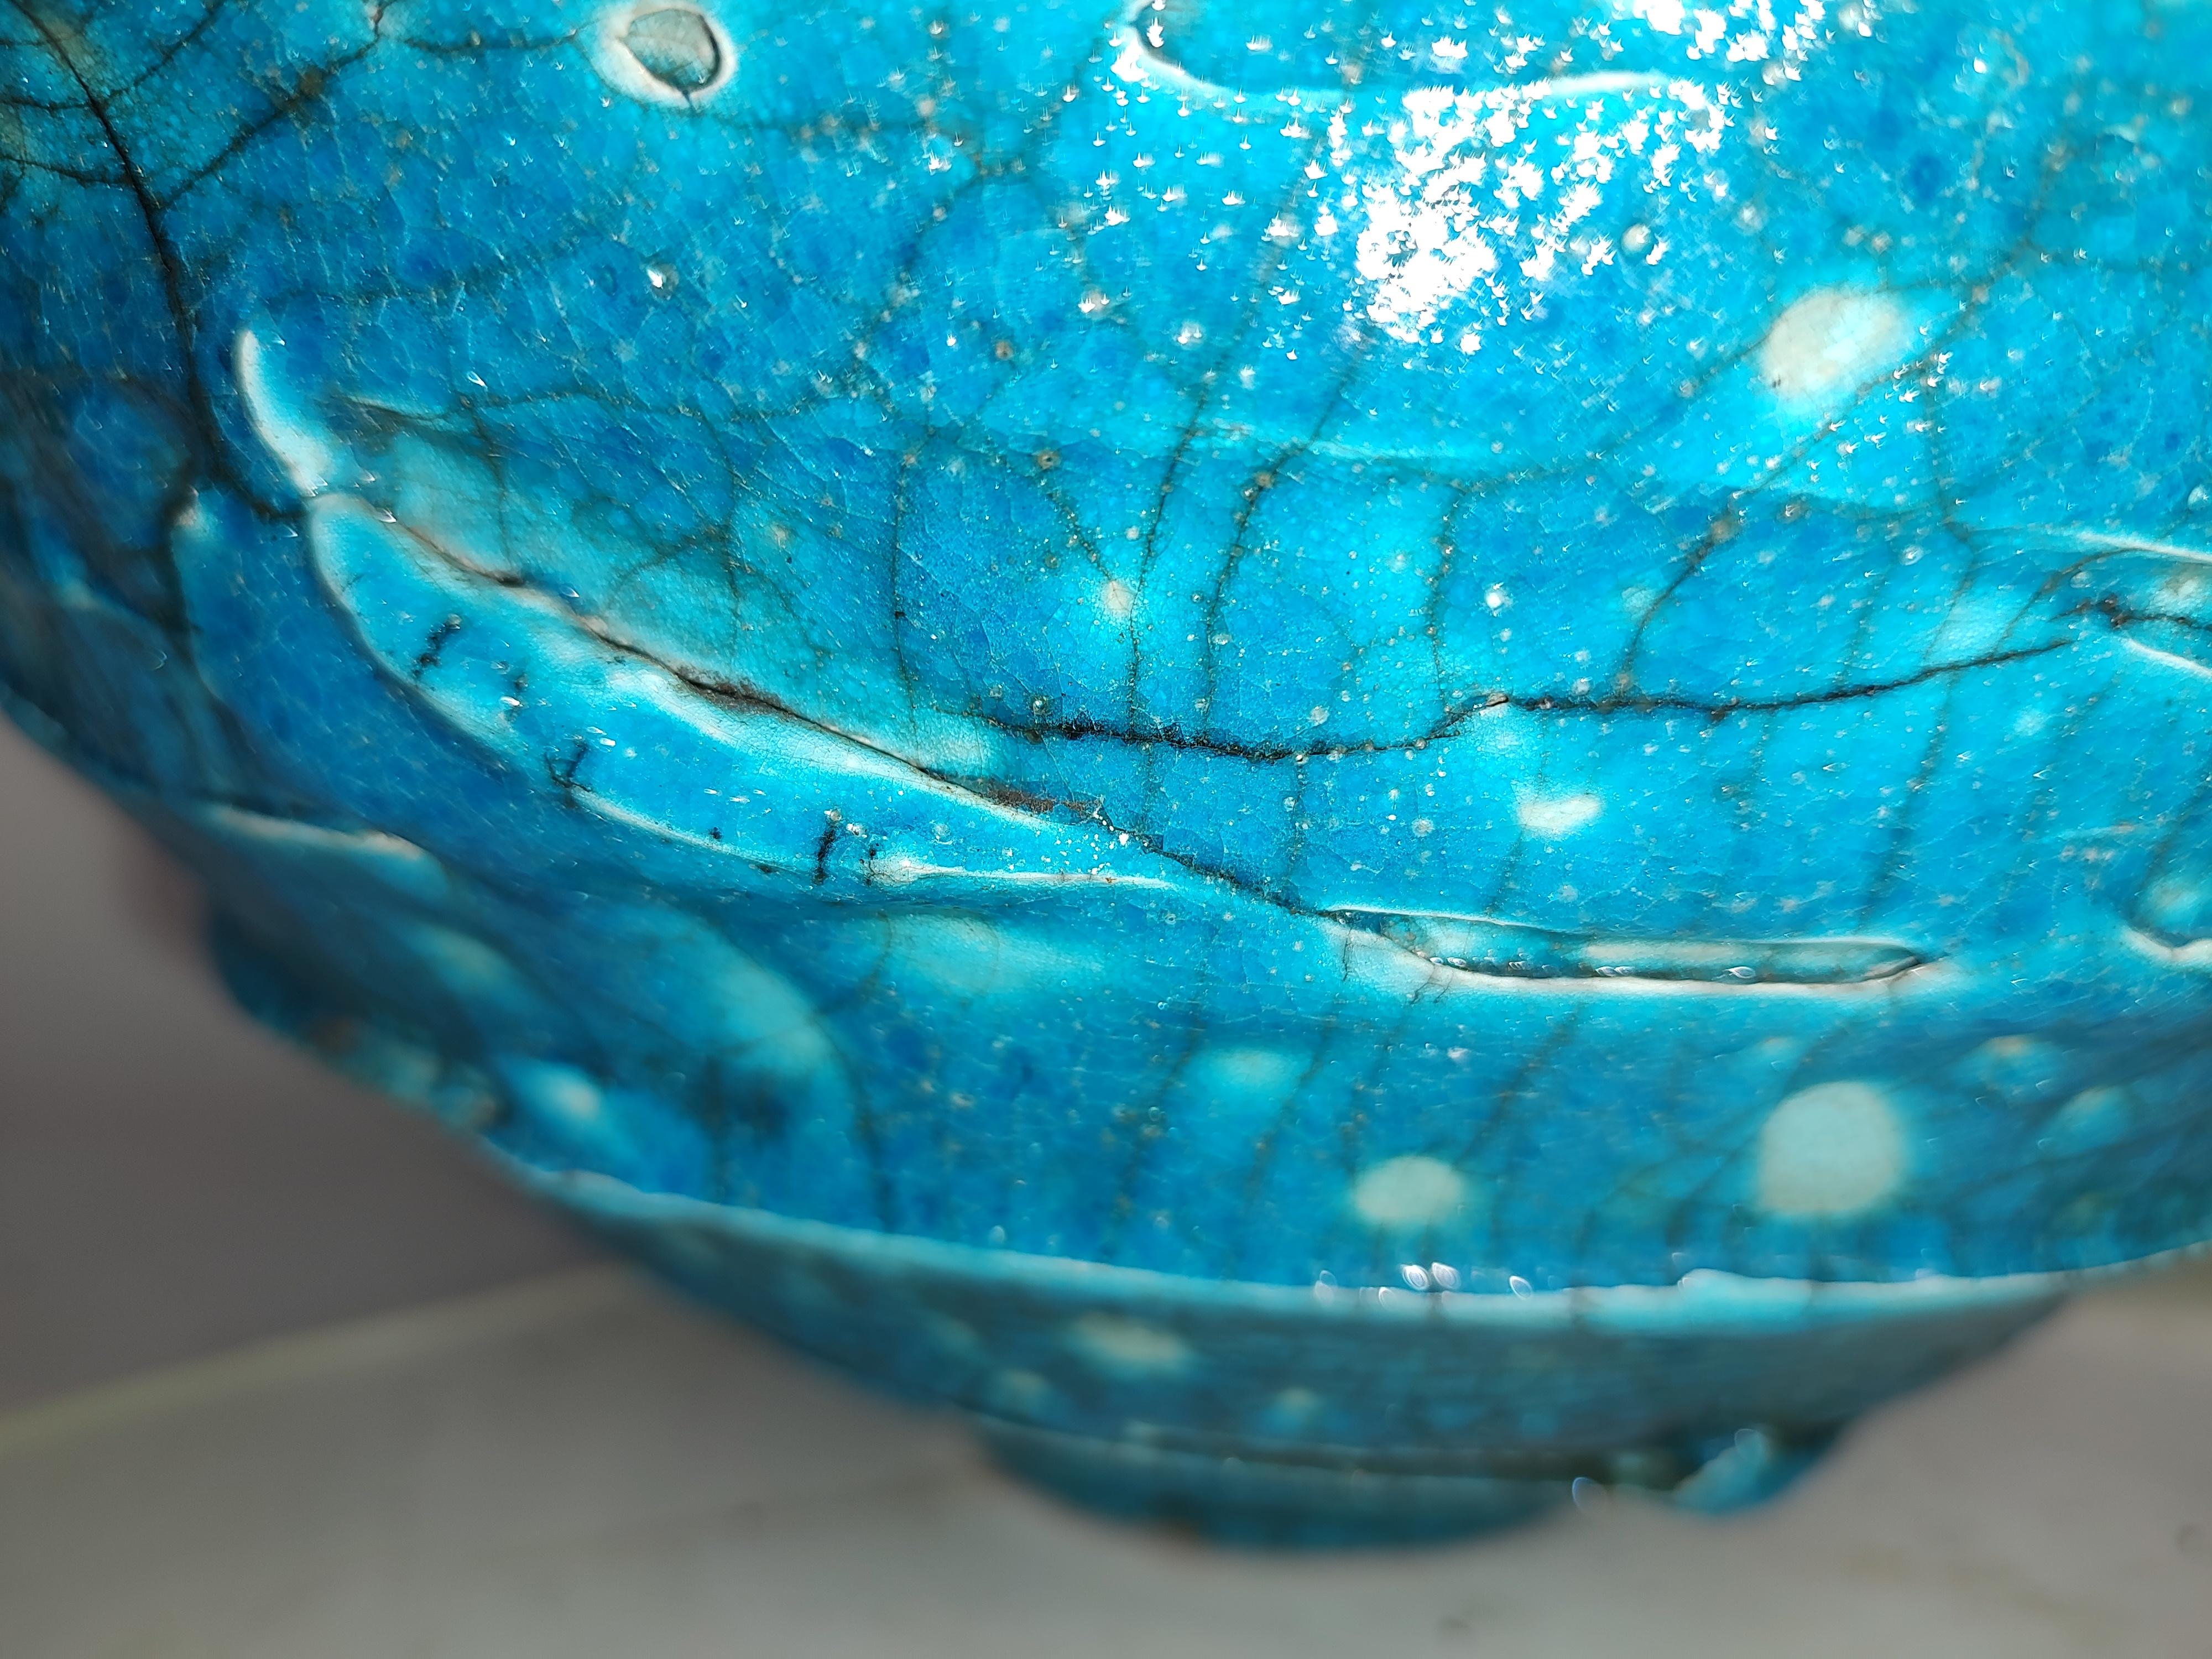 Italian Mid-Century Modern Sculptural Large Art Pottery Bowl in Turquoise Blue For Sale